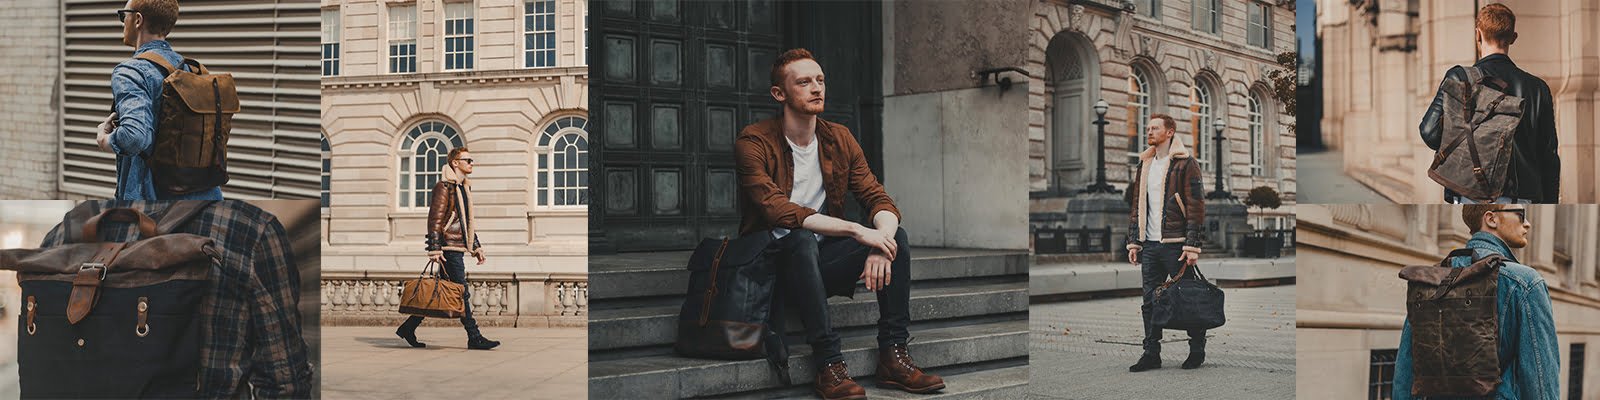 Waxed Cotton Canvas & Leather Backpacks & Weekender Duffle Bags | Mens Fashion Menswear Denim Rugged Style | Oldfield | Founded in Liverpool, England, Britain.